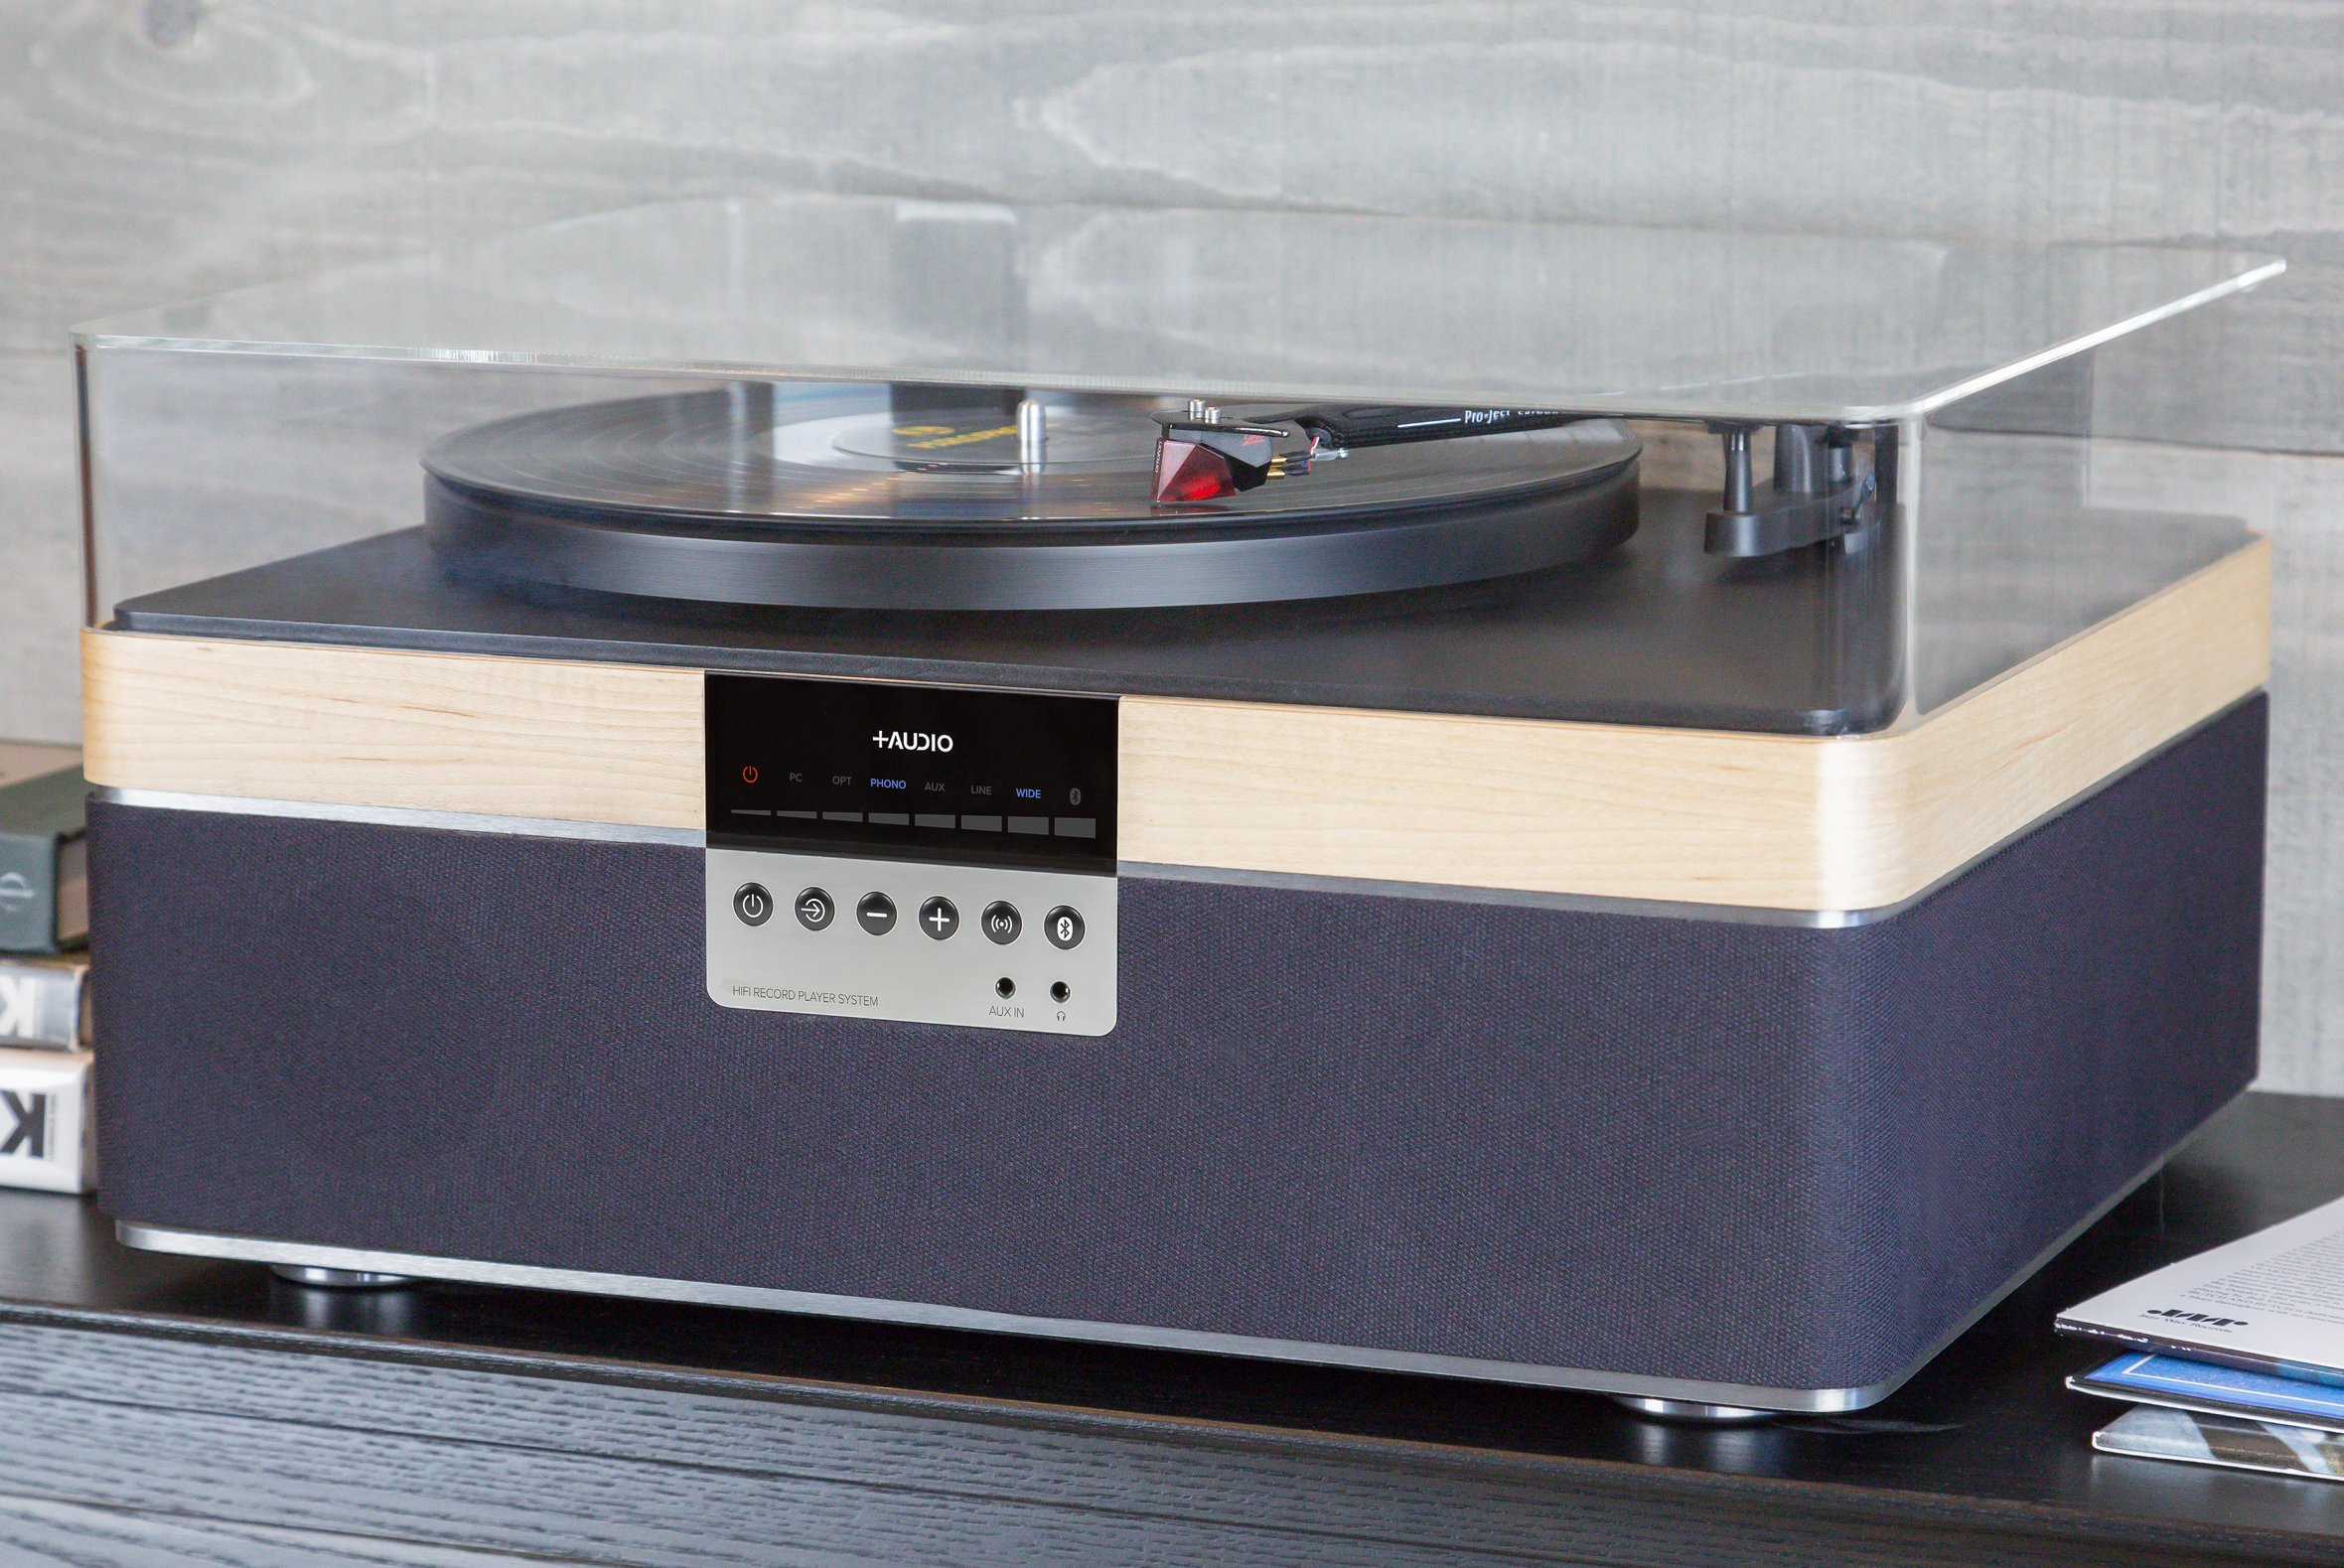 plusaudio therecord player turntable the record maple lifestyle 1180x 2x